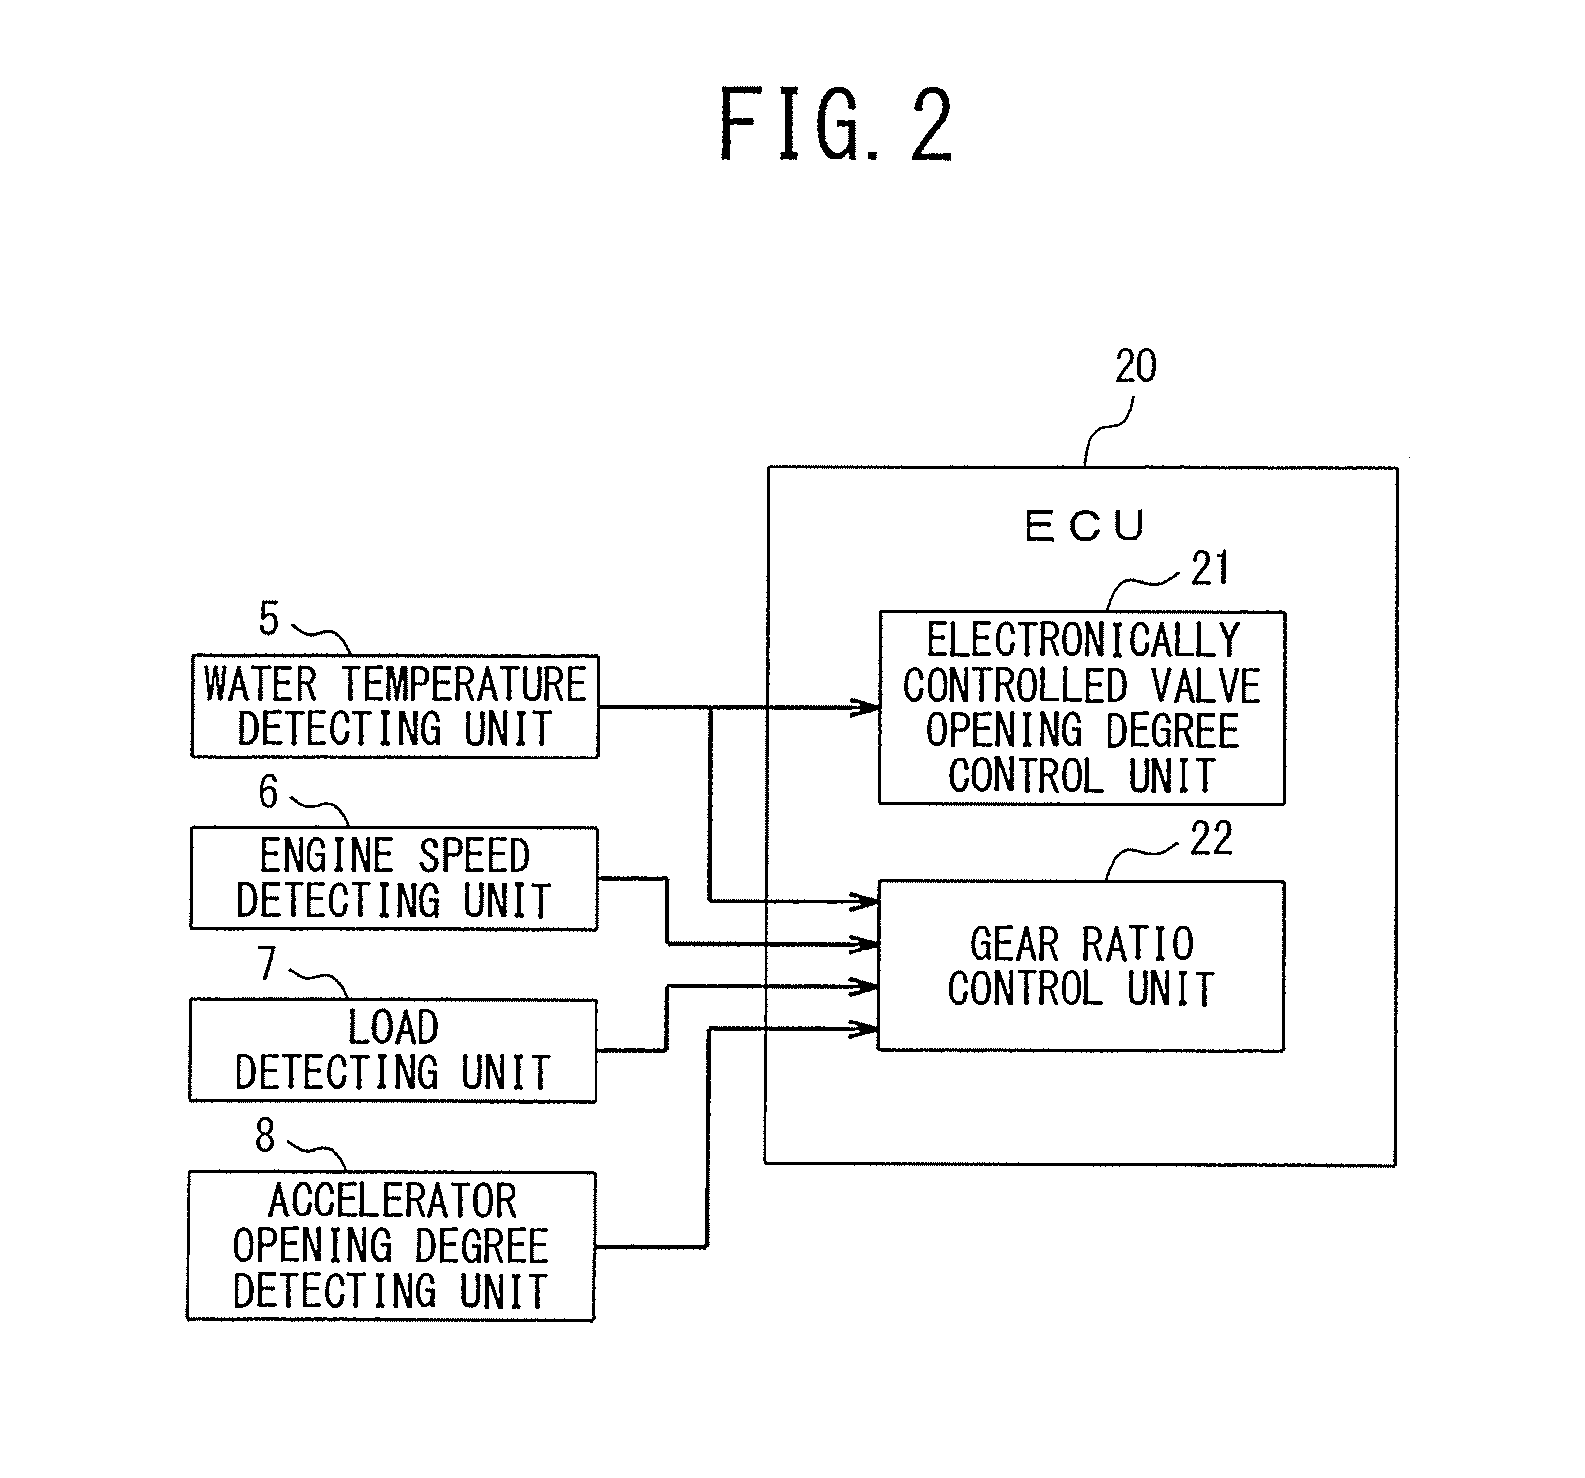 Combustion state control apparatus